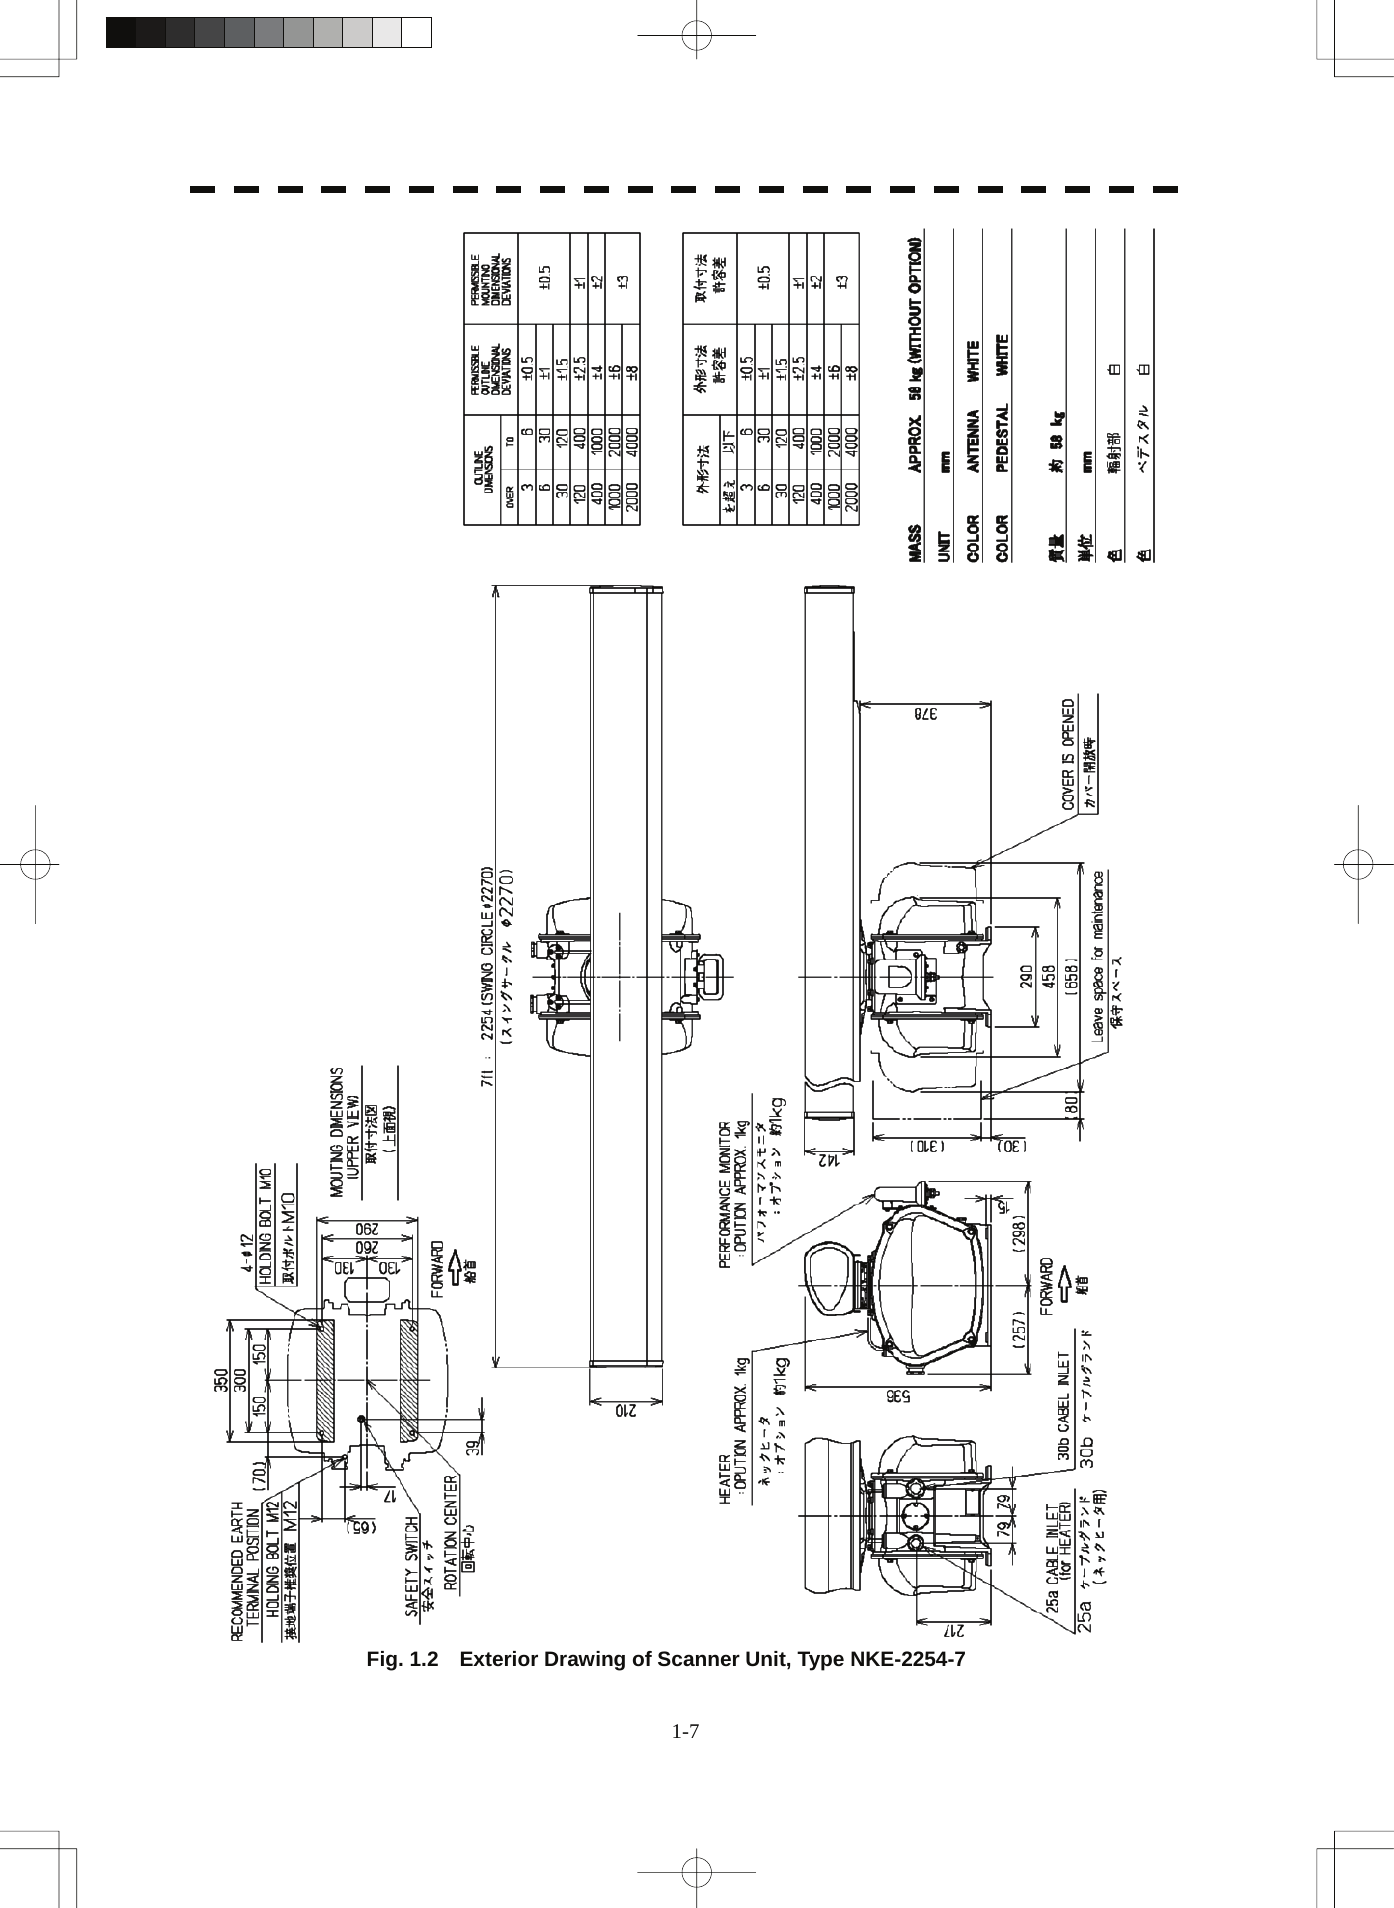   Fig. 1.2    Exterior Drawing of Scanner Unit, Type NKE-2254-7 1-7 